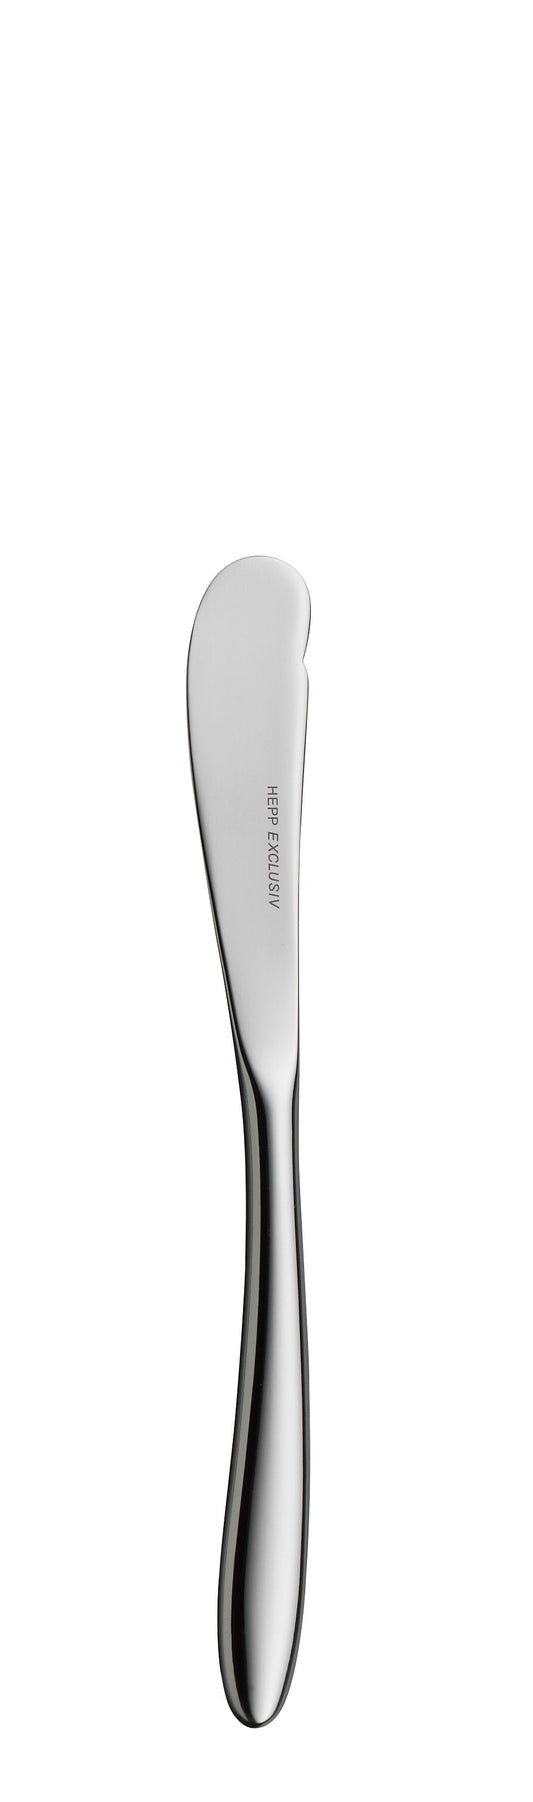 Butter knife MB AVES silverplated 170mm